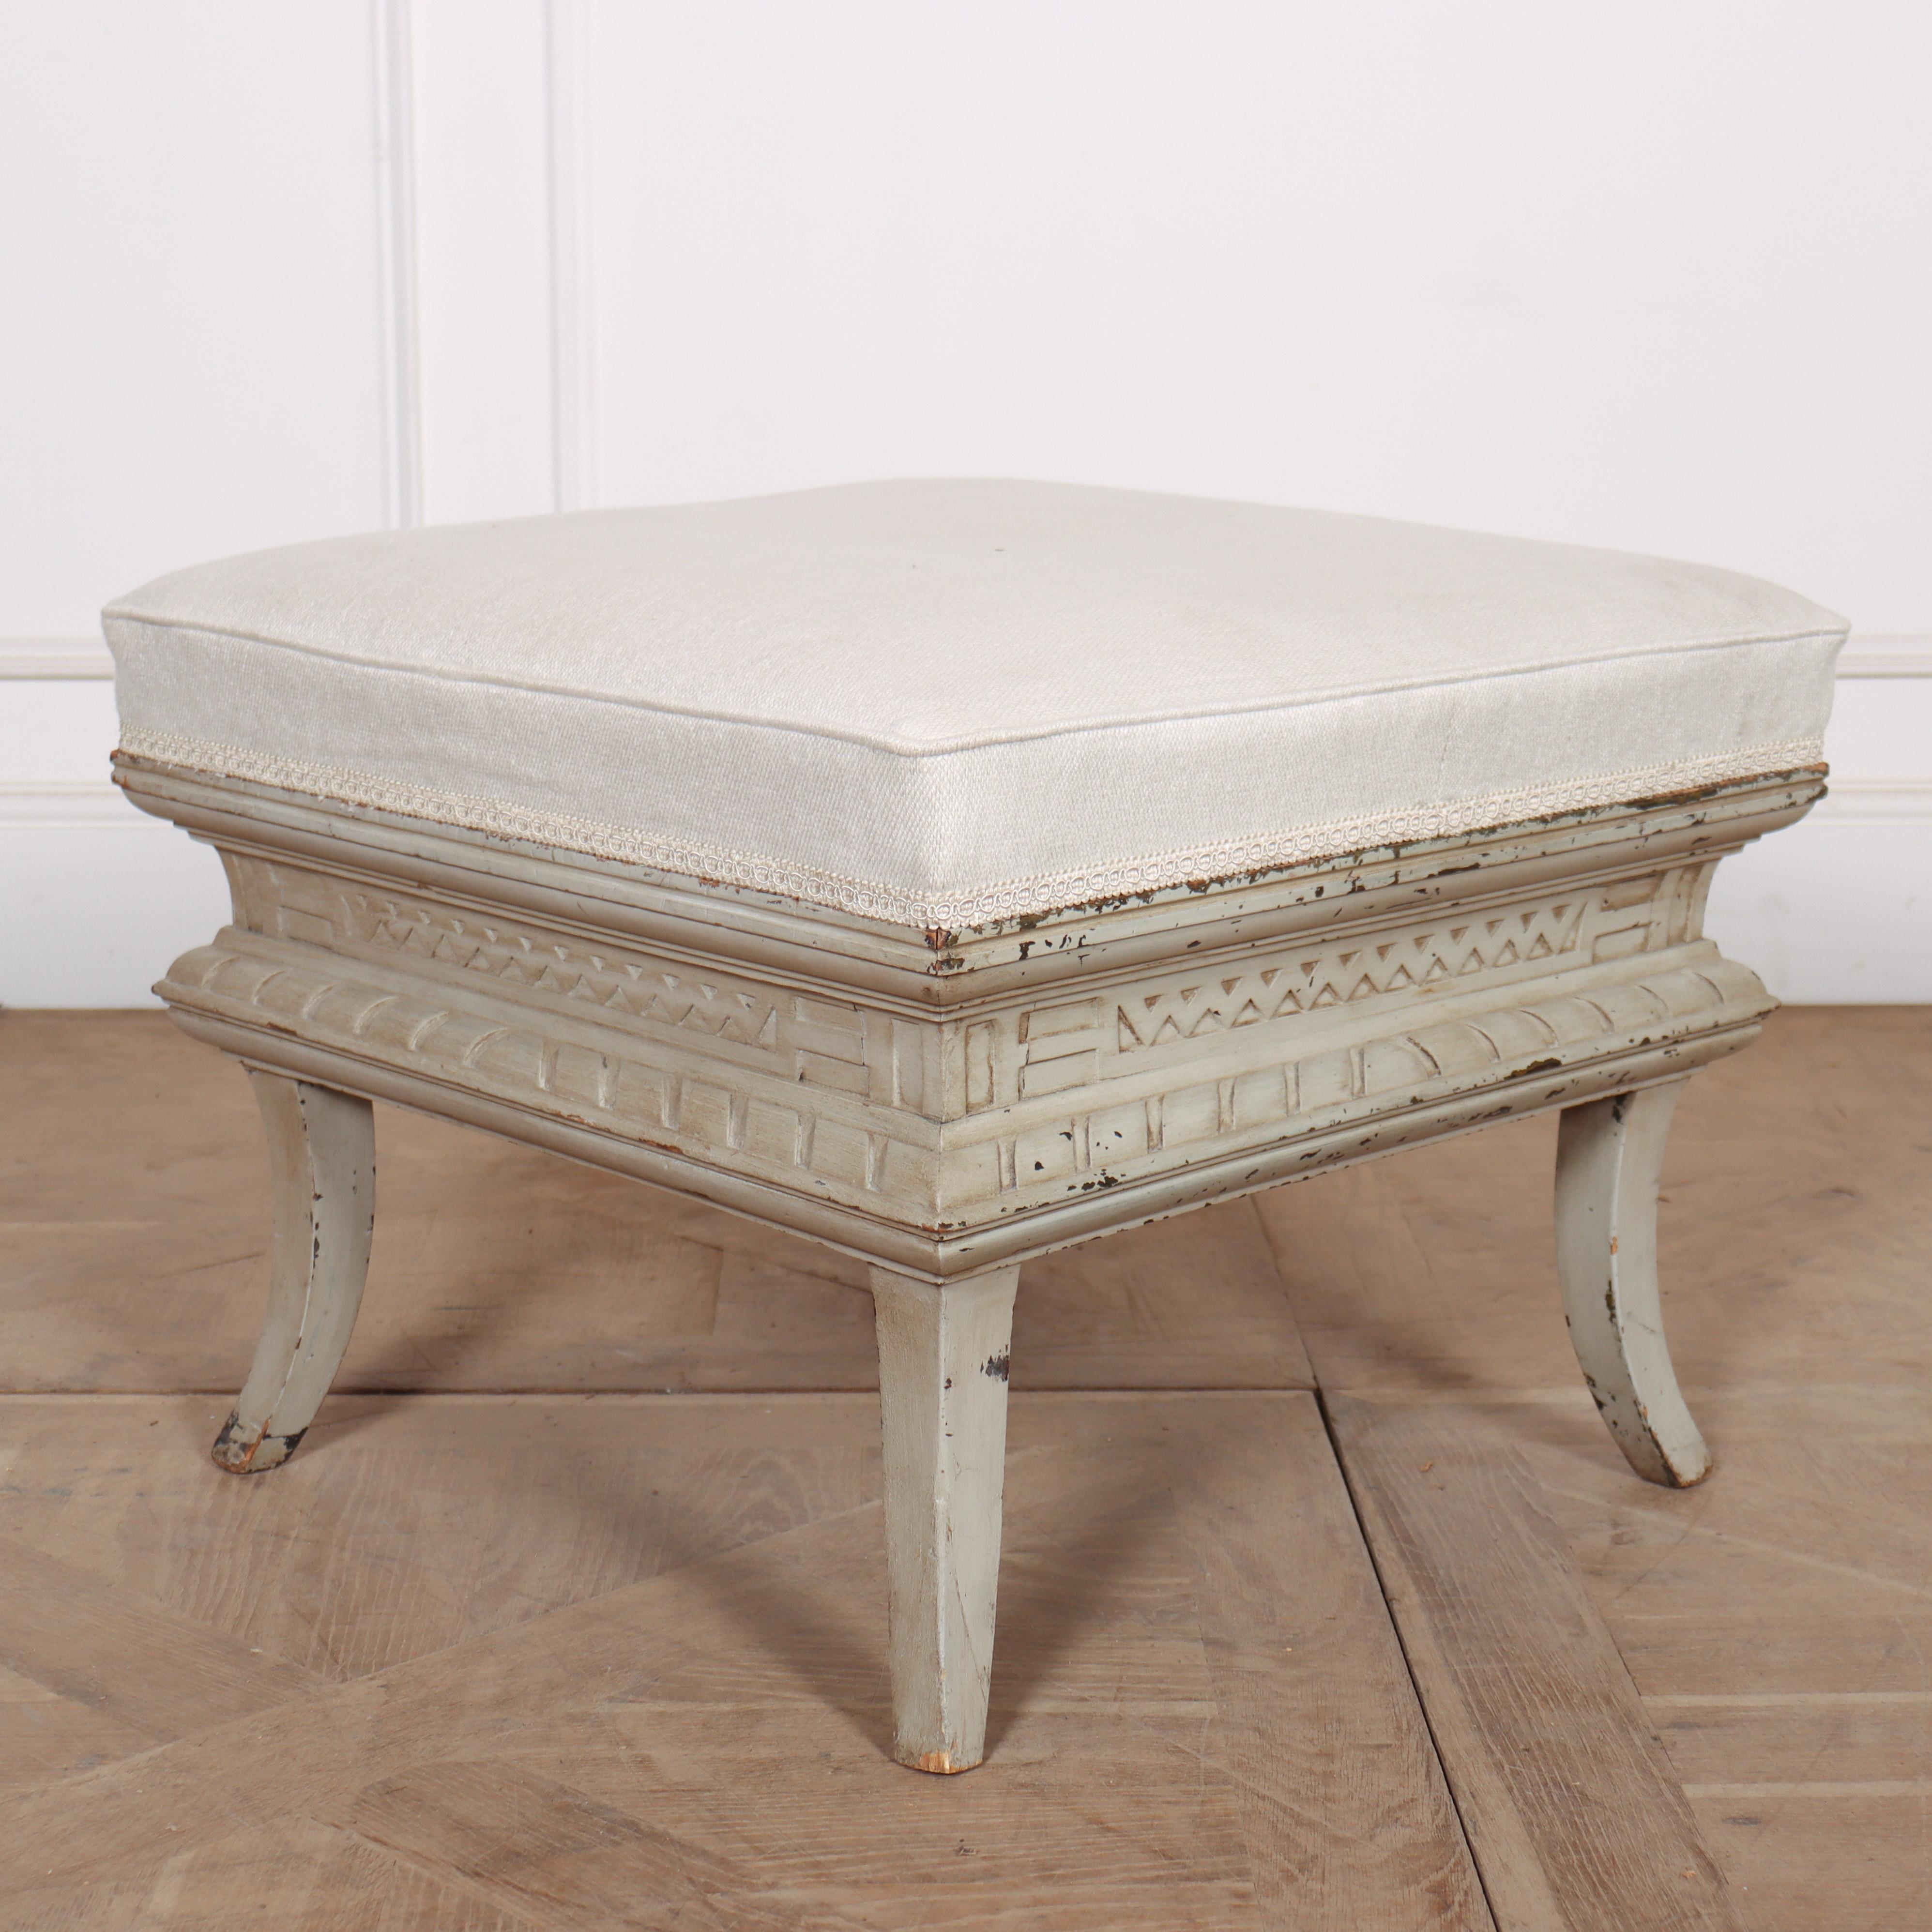 Late 19th C French painted stool, upholstered in Colefax and Fowler fabric. Very stylish. 1890.

Internal reference: JG1

Reference: 8050

Dimensions
23.5 inches (60 cms) Wide
23.5 inches (60 cms) Deep
18.5 inches (47 cms) High